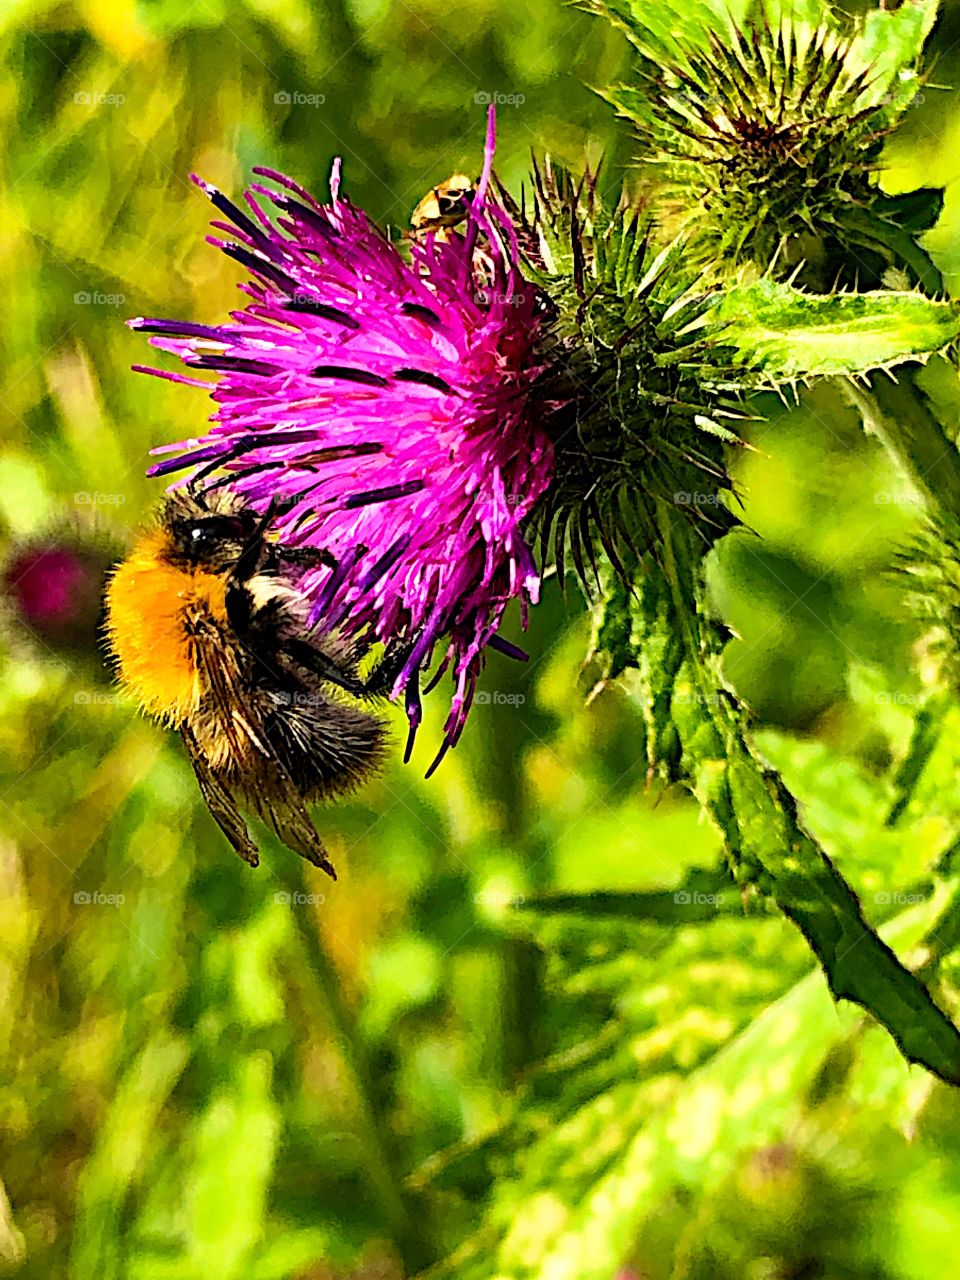 Bumble bee working on! 